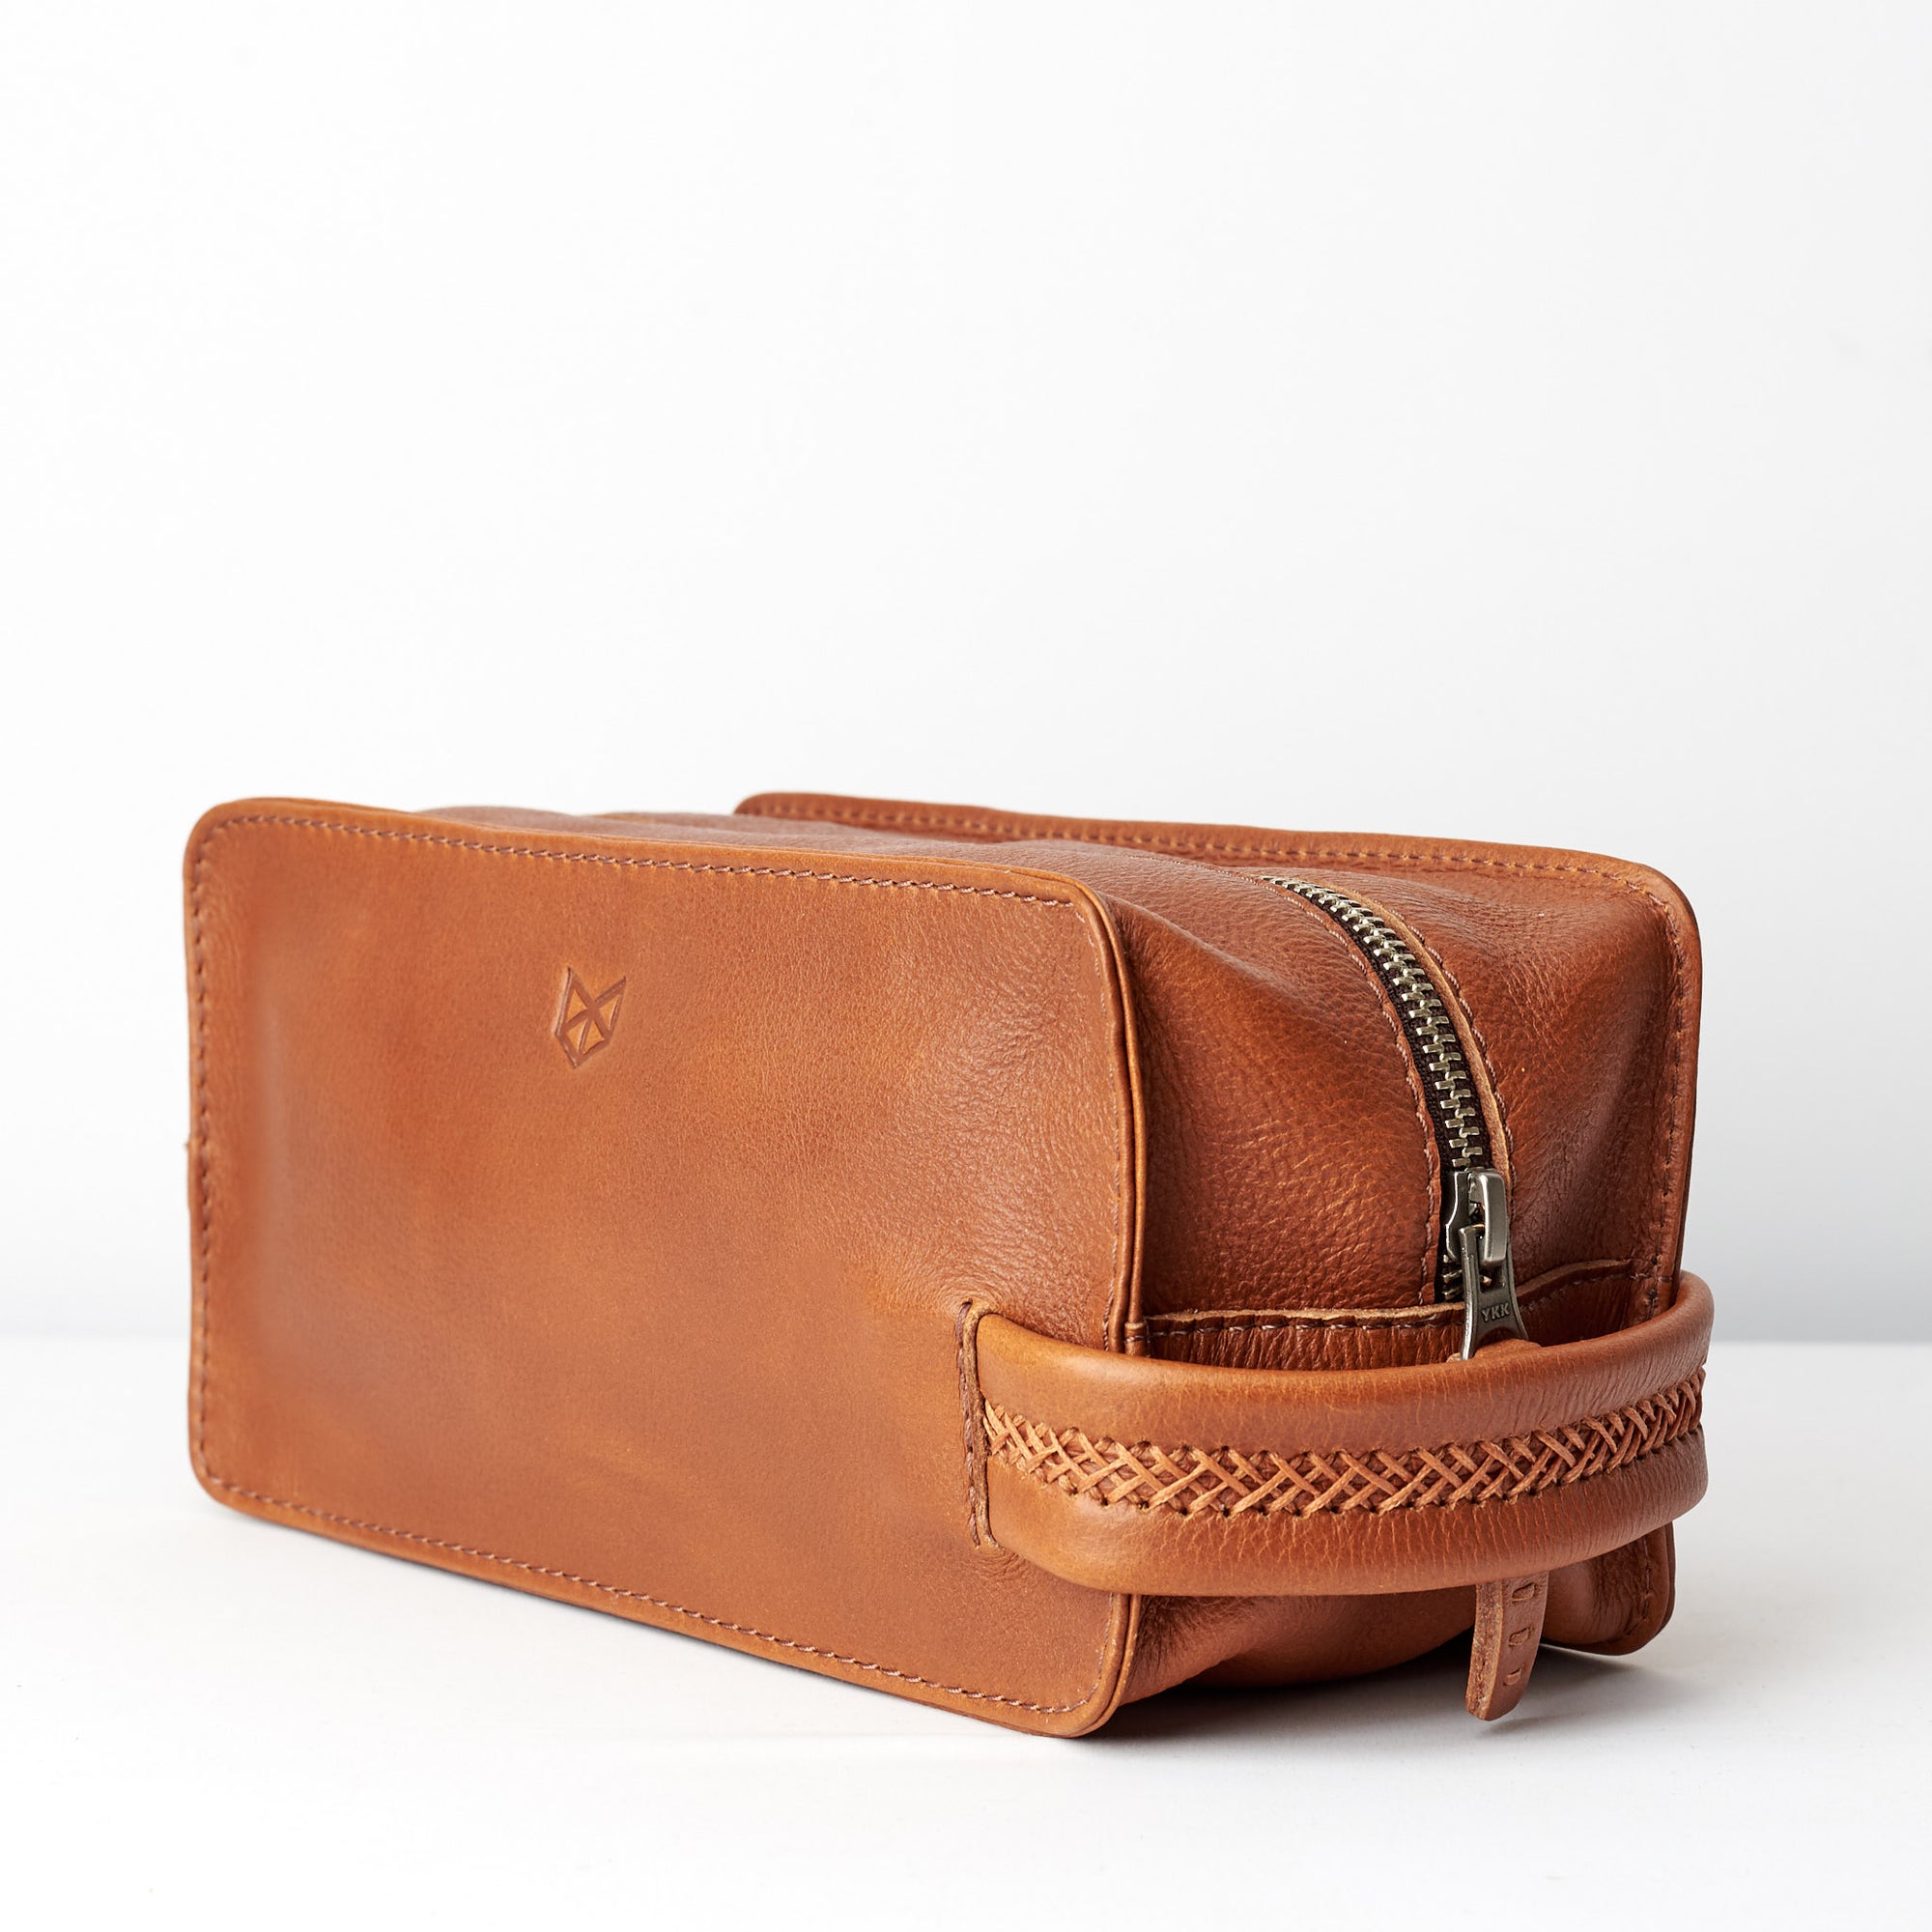 Styling products . Tan leather toiletry, shaving bag with hand stitched handle. Groomsmen gifts. Leather good crafted by Capra Leather 